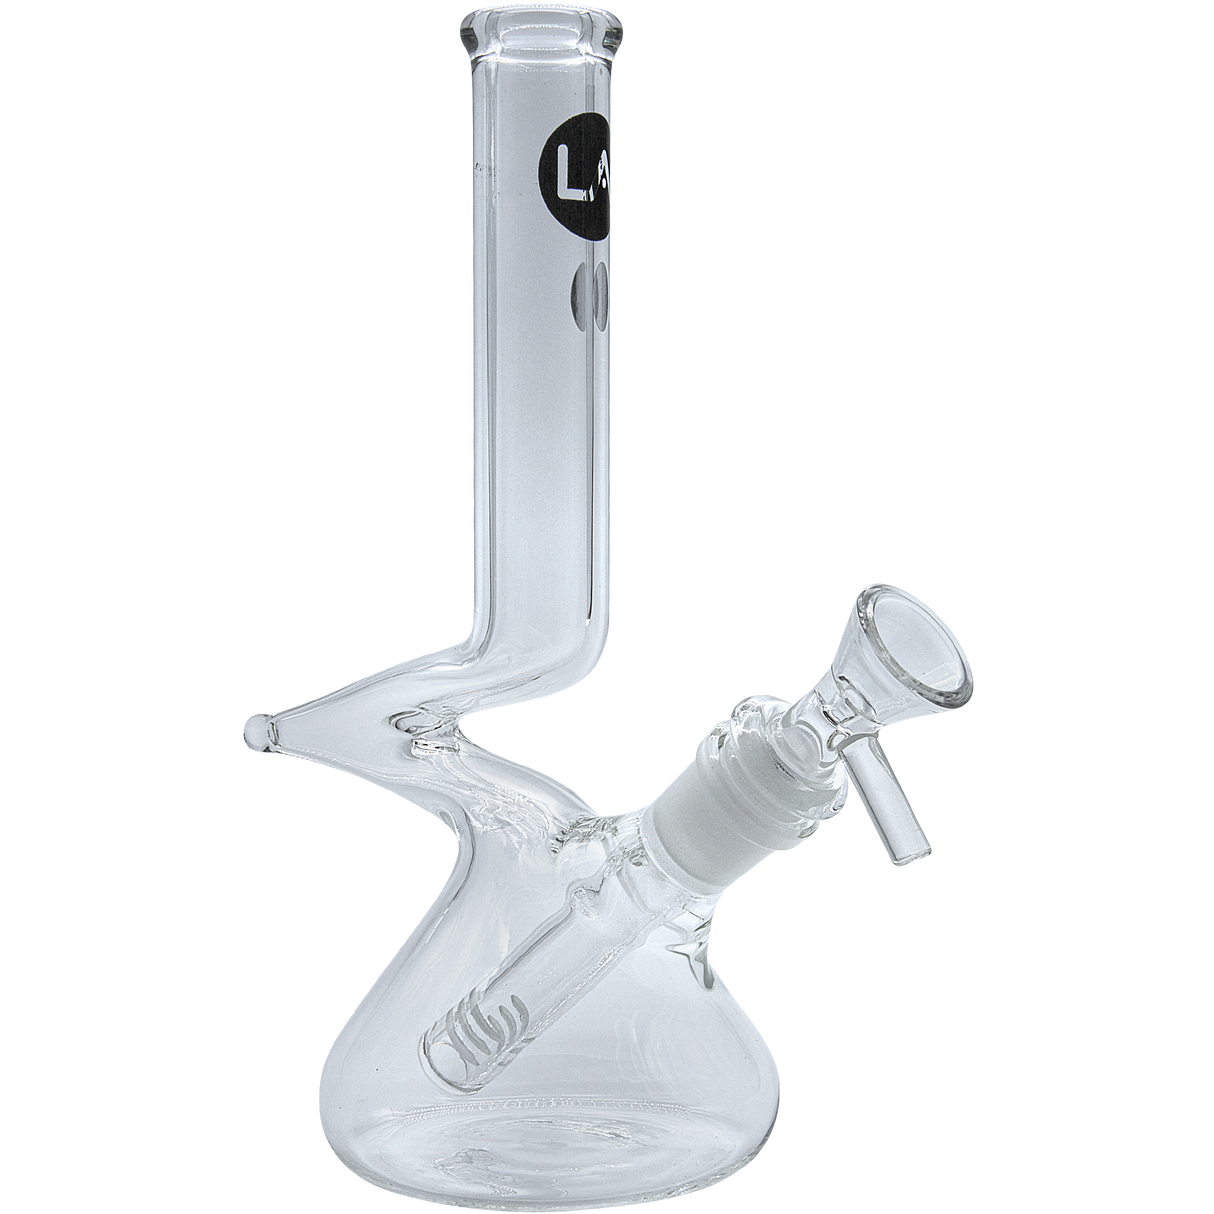 LA Pipes "The Zag" Beaker Zong Style Bong with Clear Borosilicate Glass - Side View